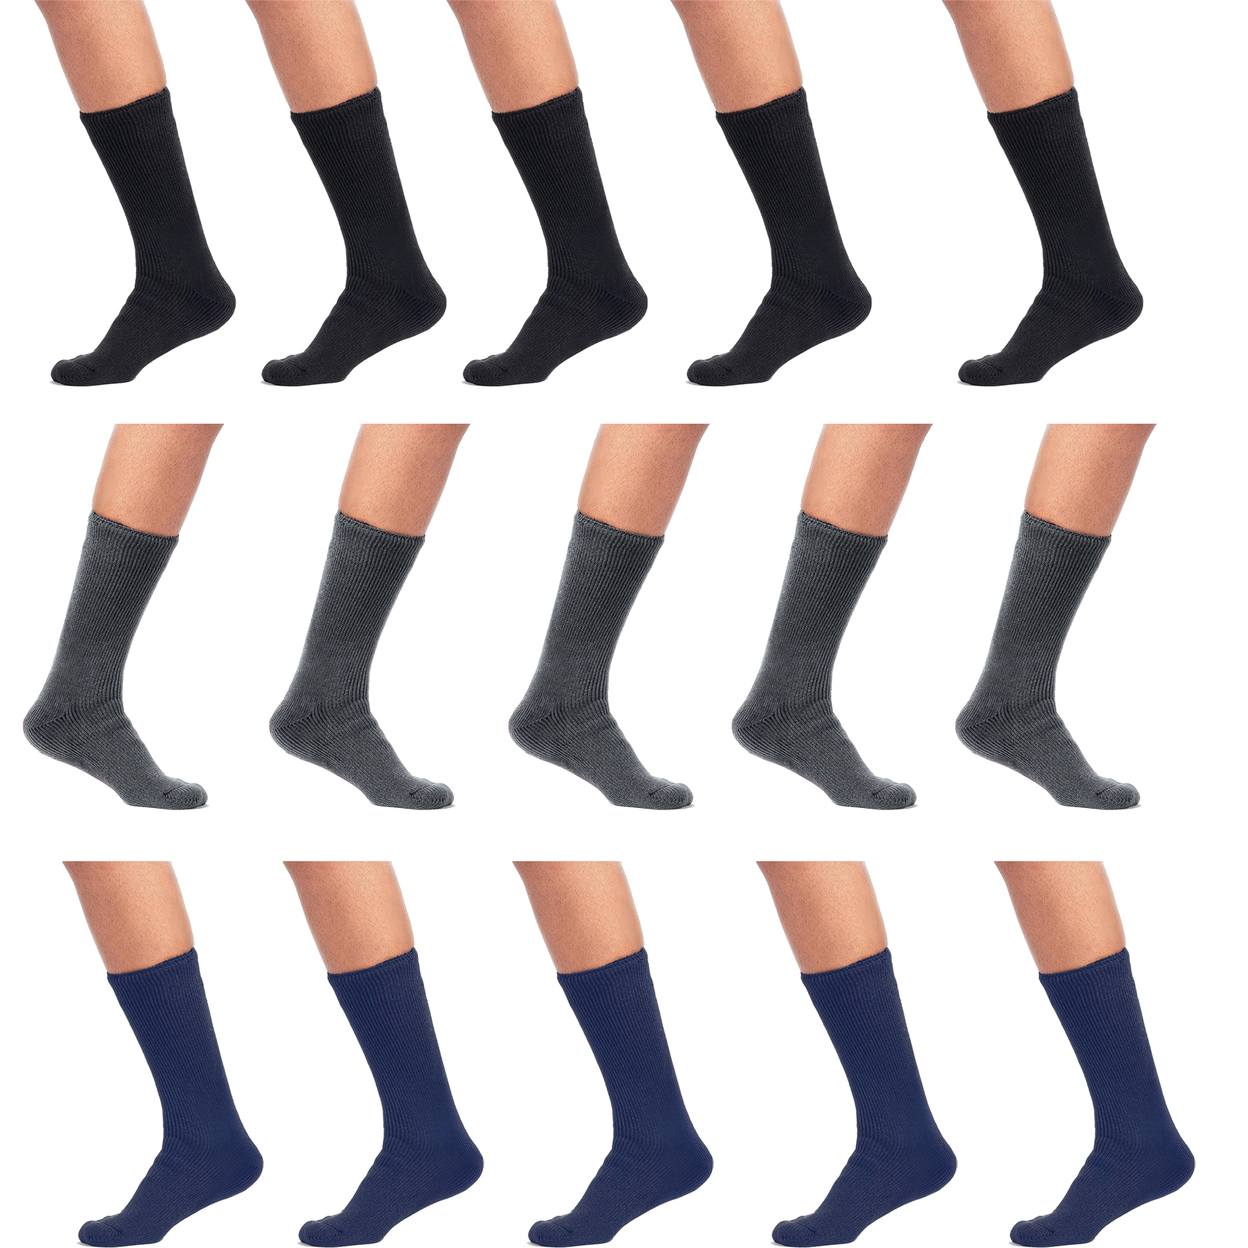 10-Pairs: Men's Moisture-Wicking Cushioned Weather Proof Dri -Tech Industrial Working Socks